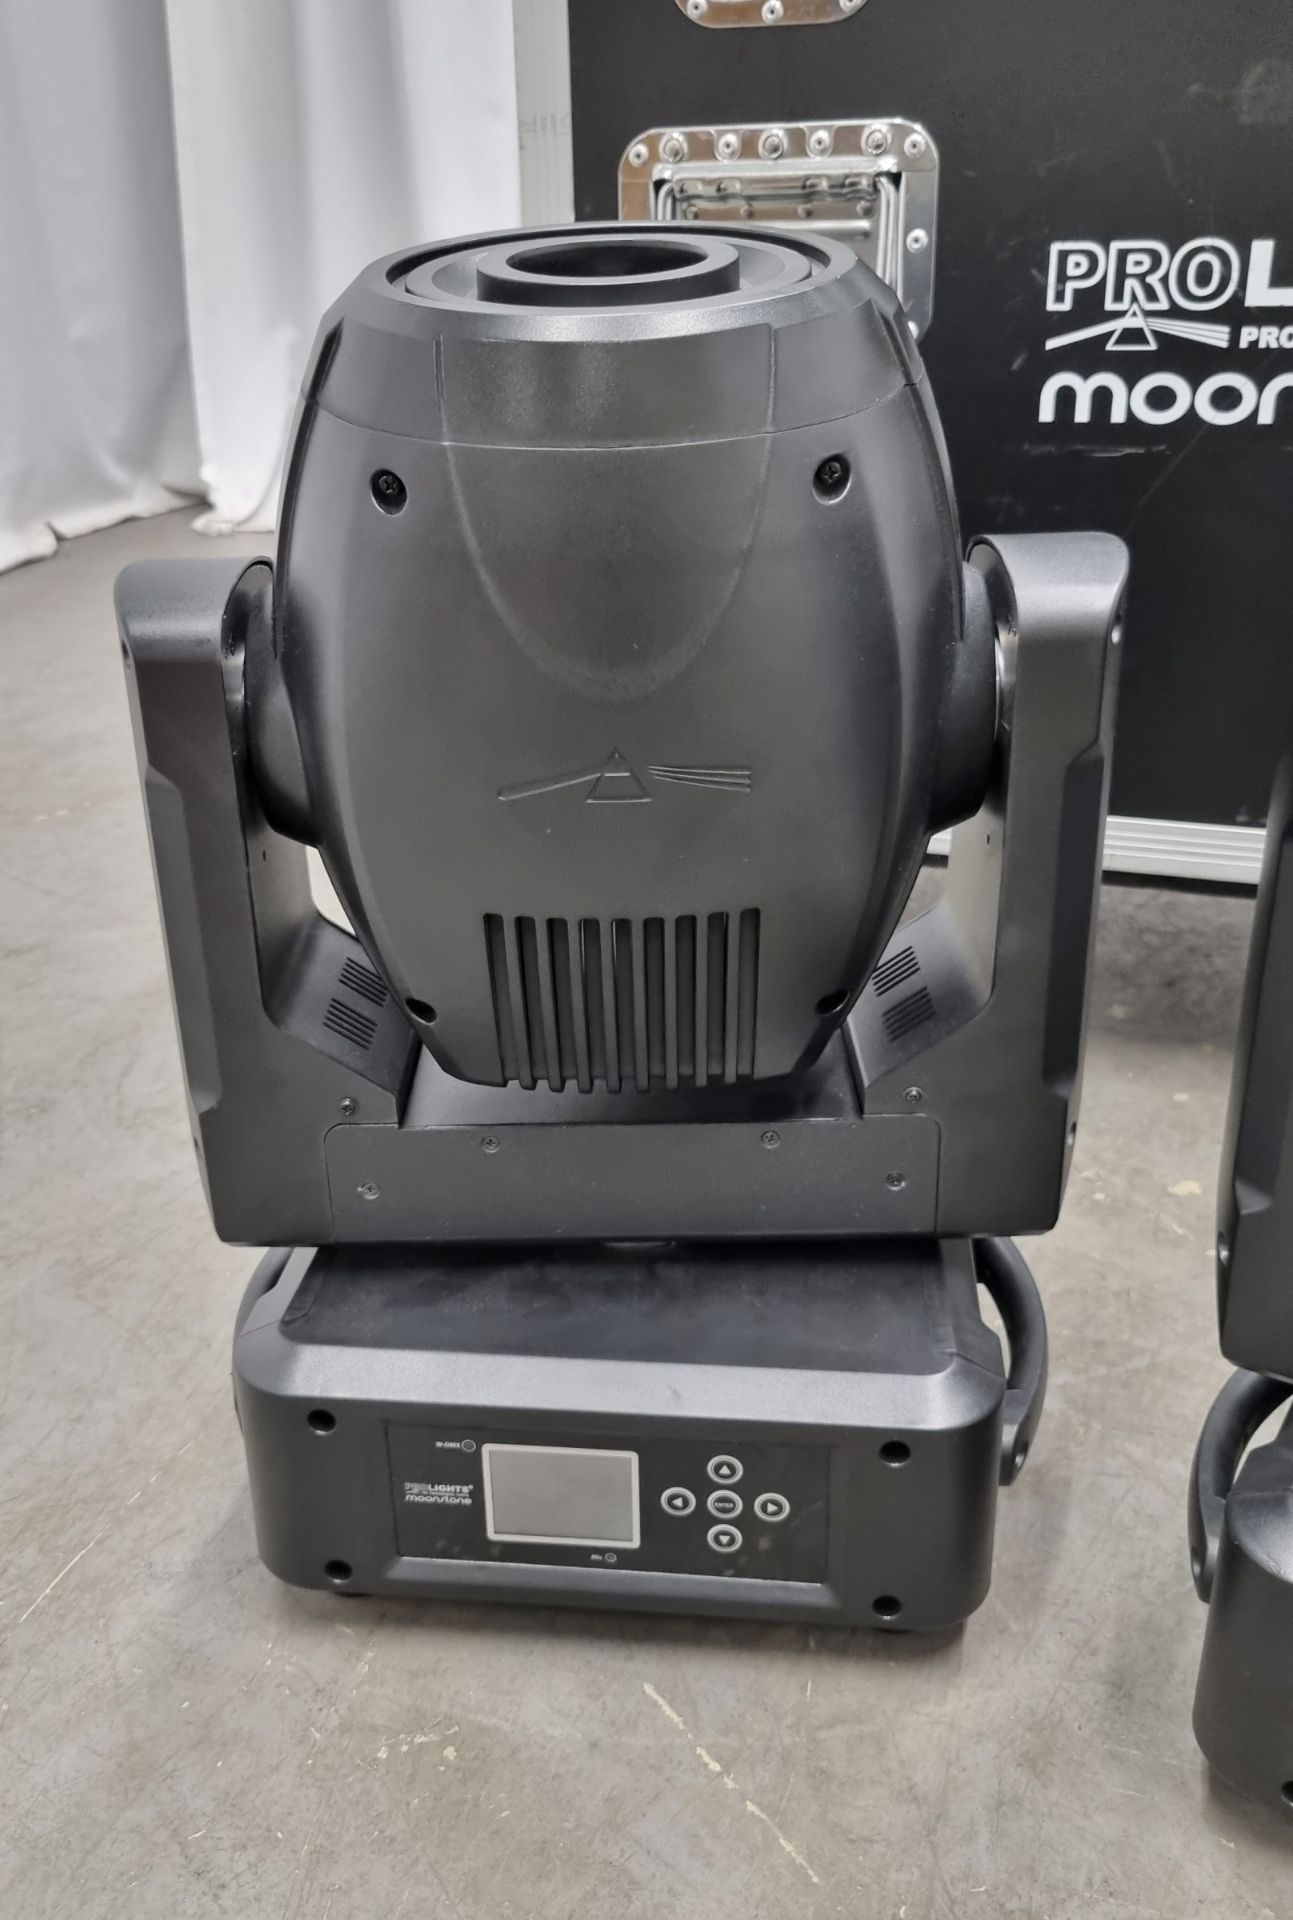 2x Prolights Moonstone LED spot moving head lights with flight case - 1x LIGHT SPARES OR REPAIRS - Image 3 of 14